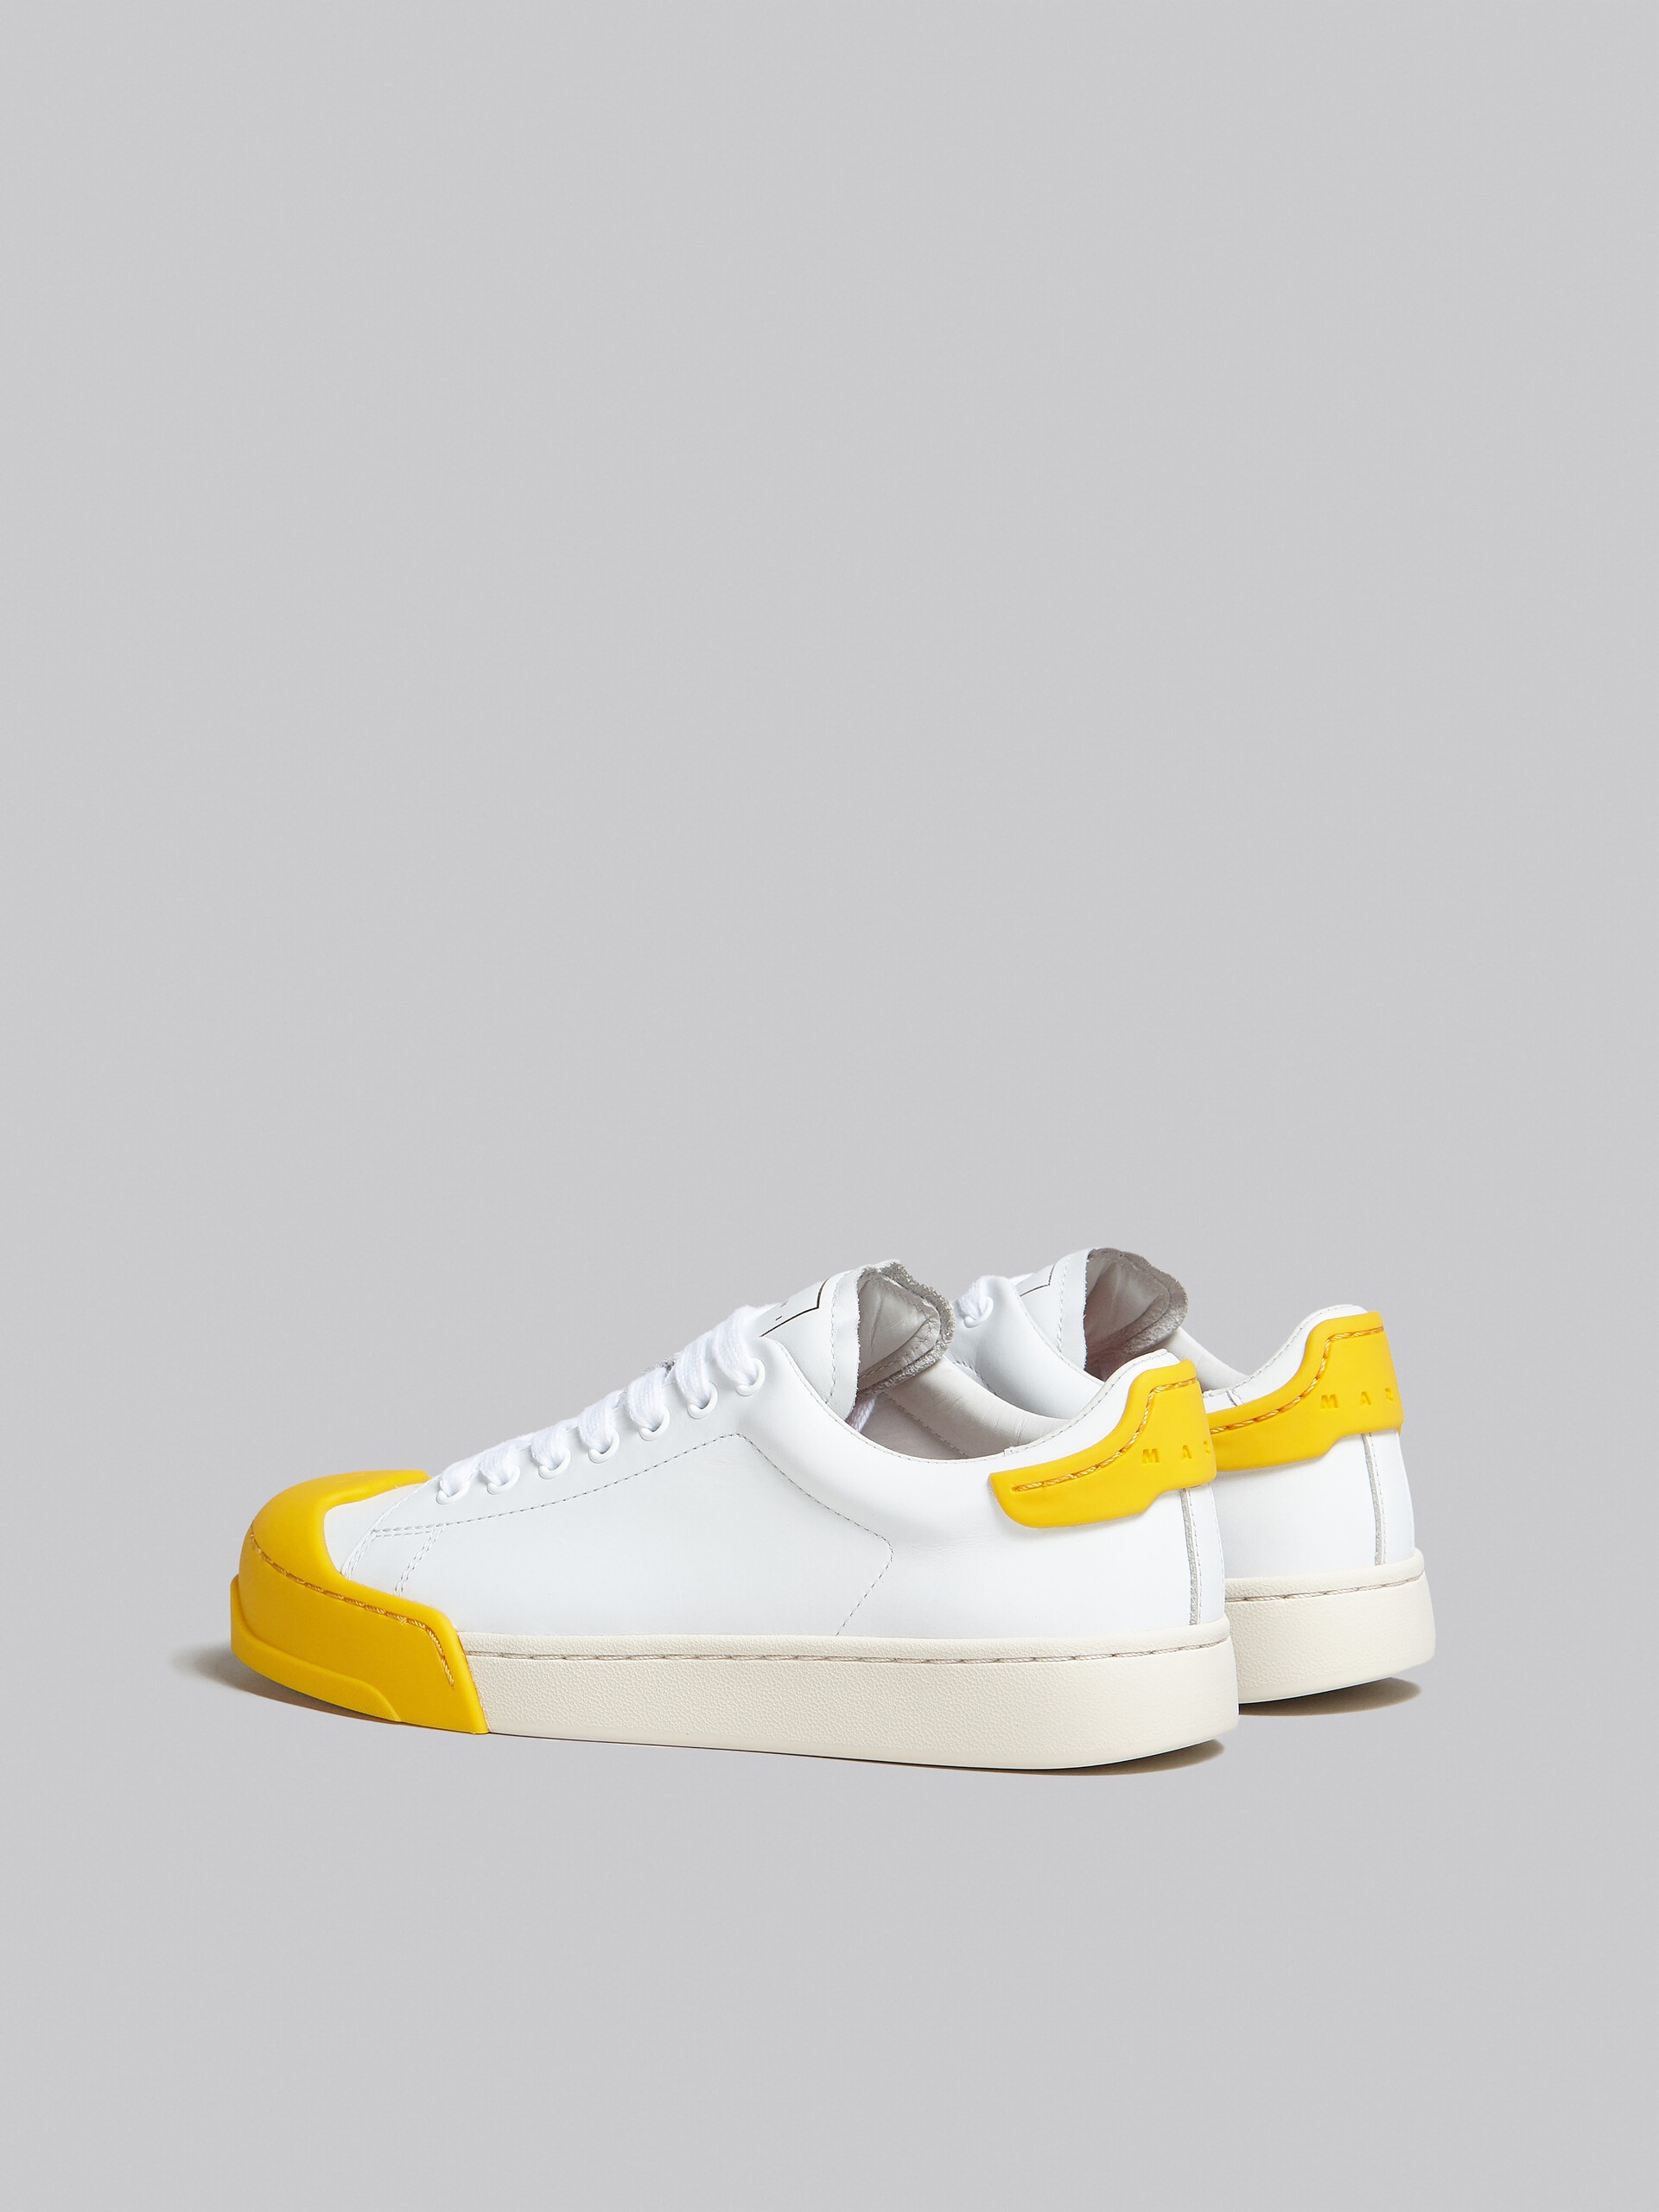 DADA BUMPER SNEAKER IN WHITE AND YELLOW LEATHER - 3